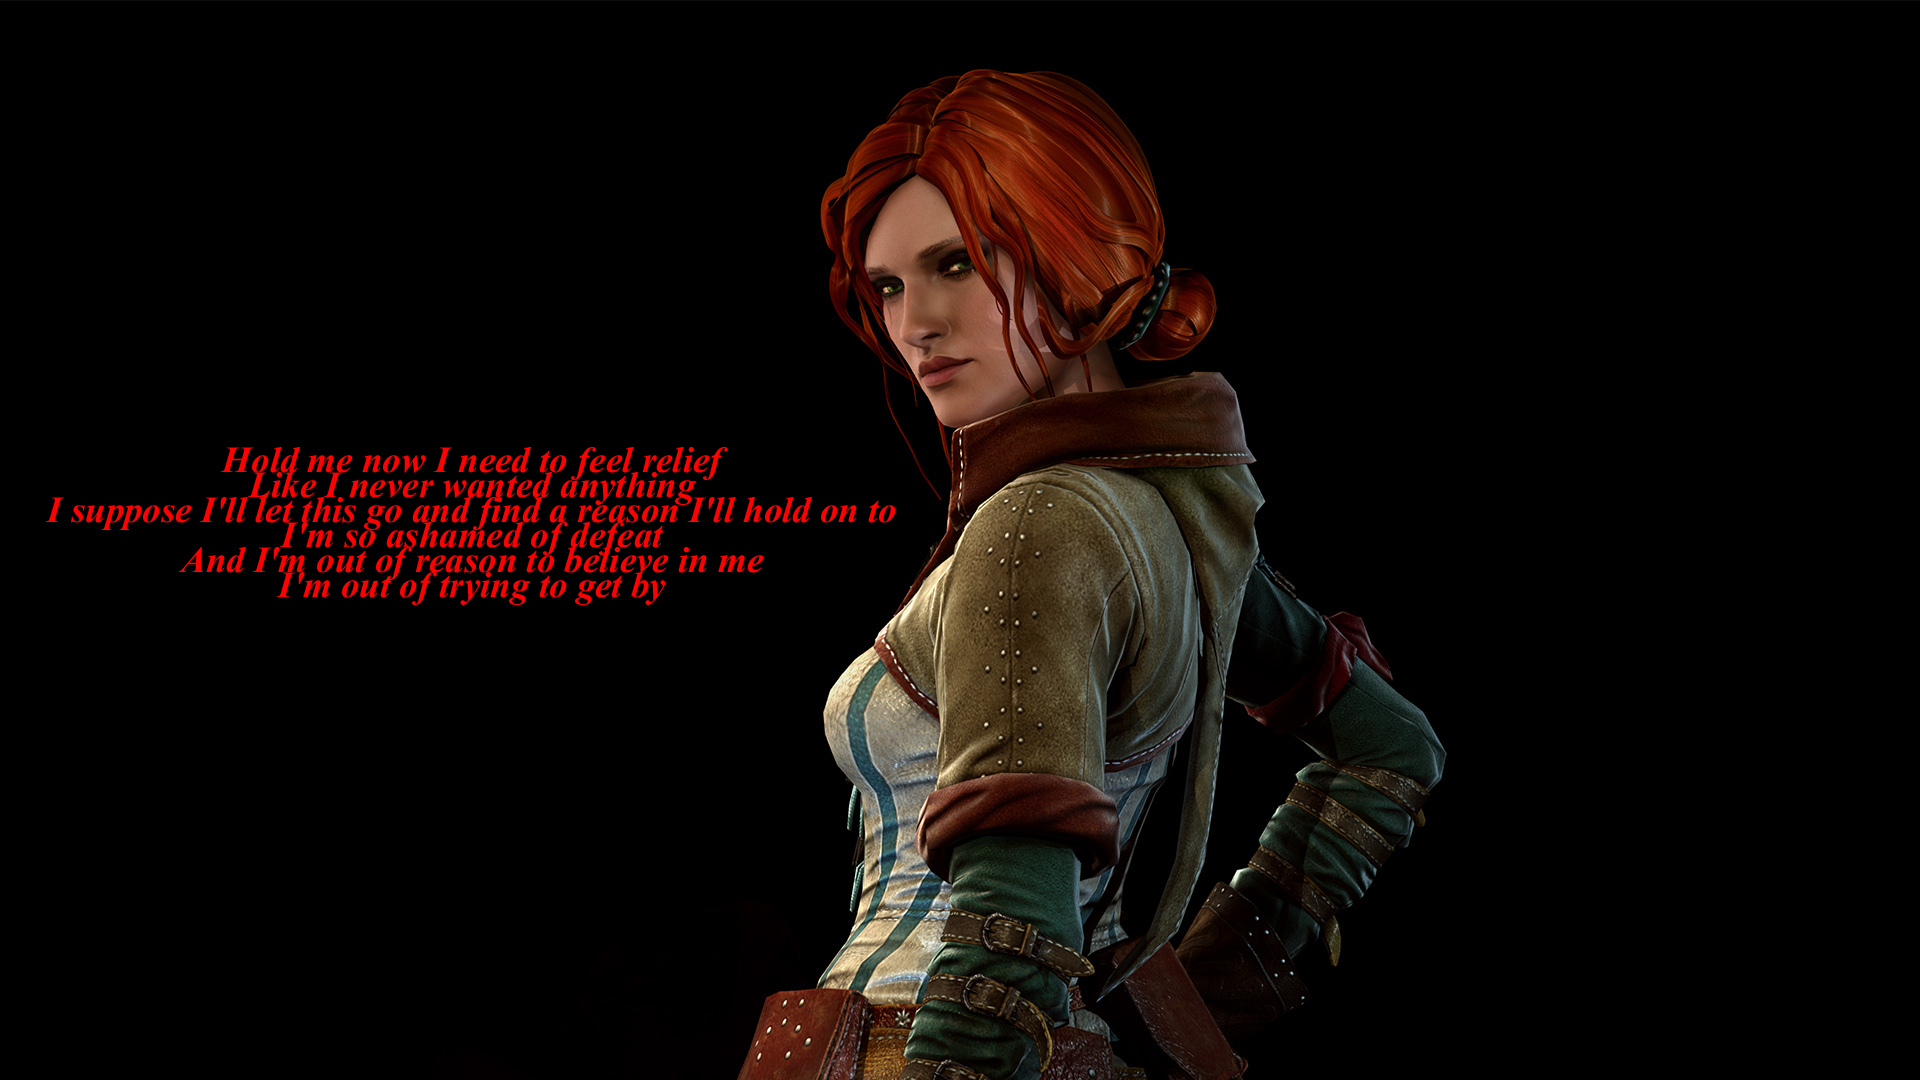 triss wallpaper,adventure game,pc game,fictional character,games,cg artwork